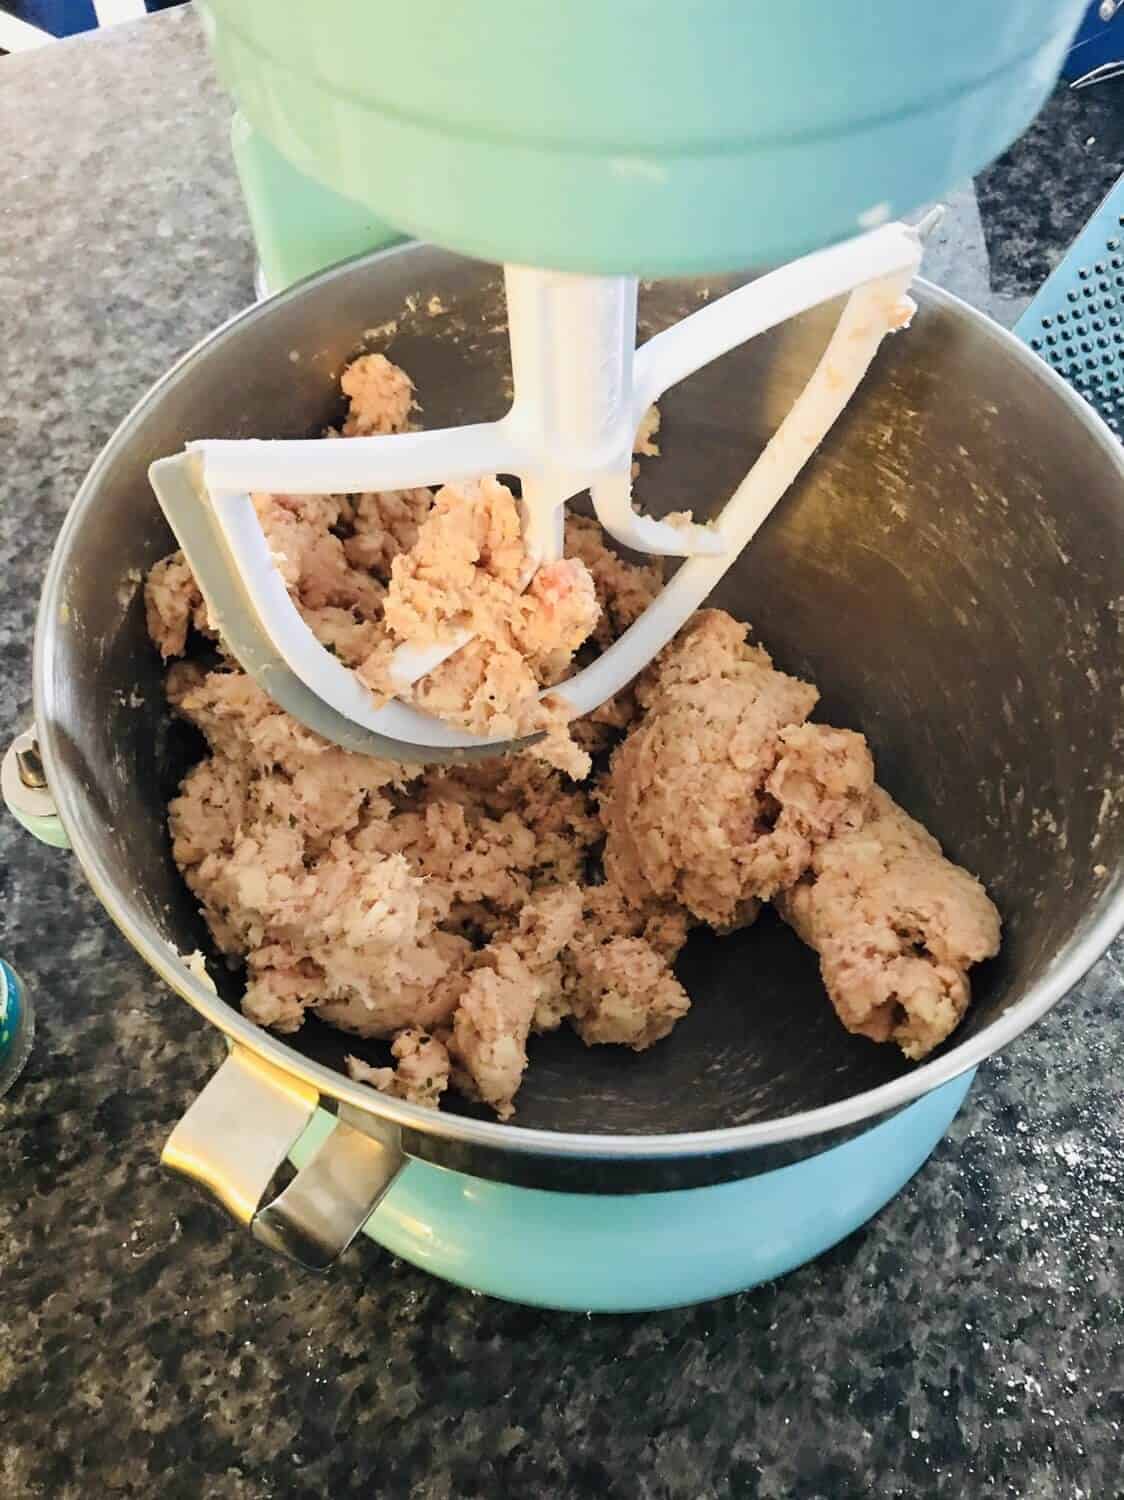 using a mixer to combine all the ingredients